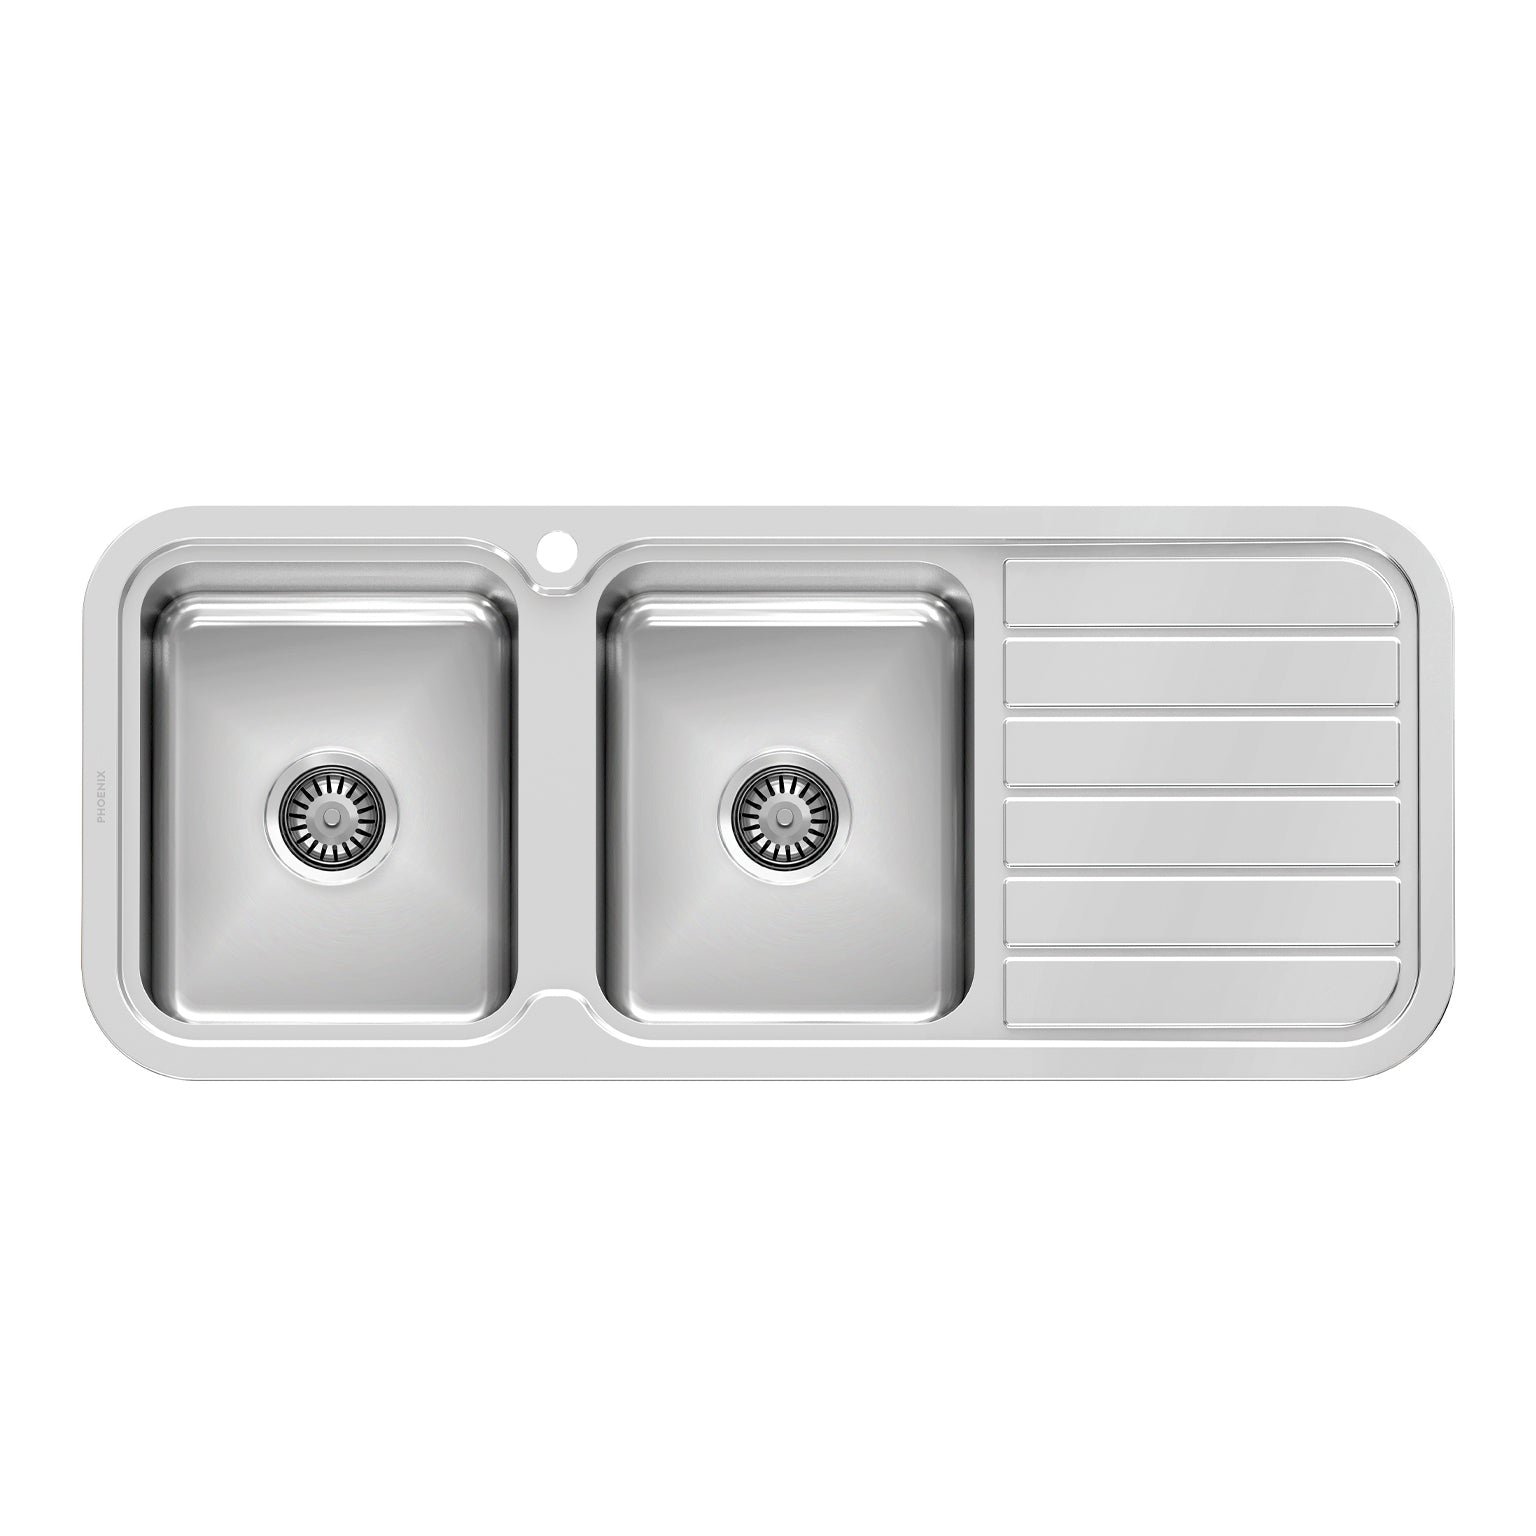 PHOENIX 1000 SERIES DOUBLE BOWL SINK WITH DRAINER AND TAPHOLE 1180MM